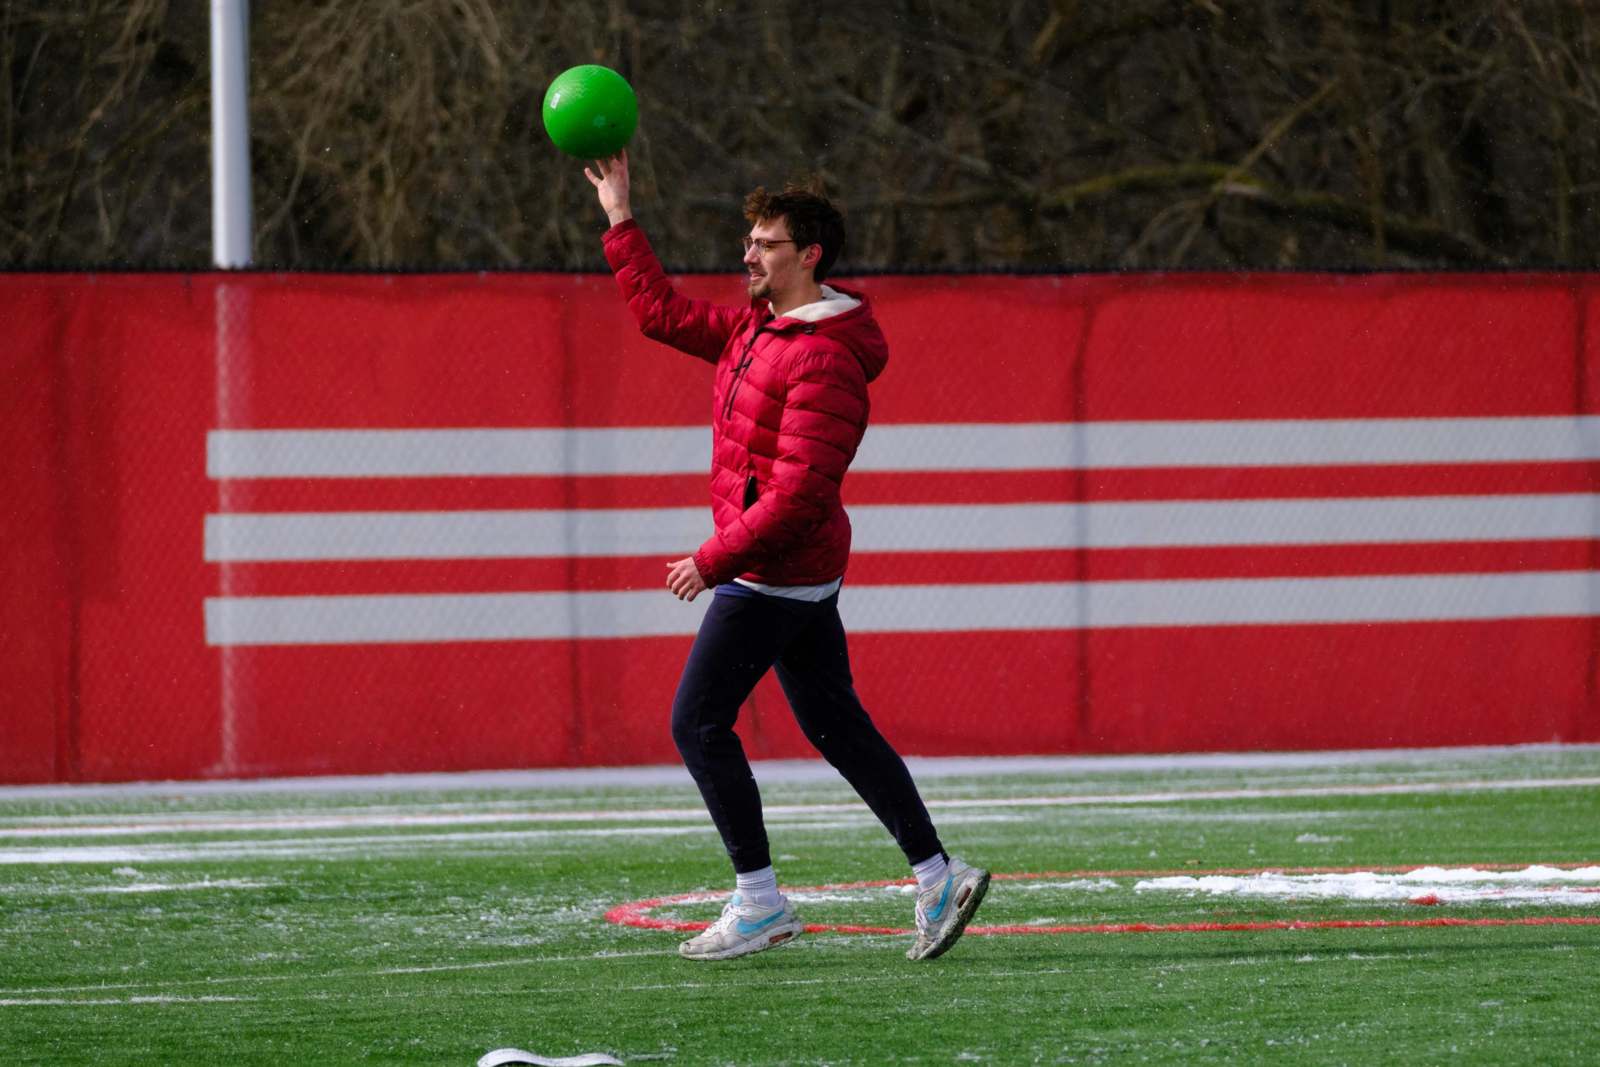 a man in a red jacket holding a green ball